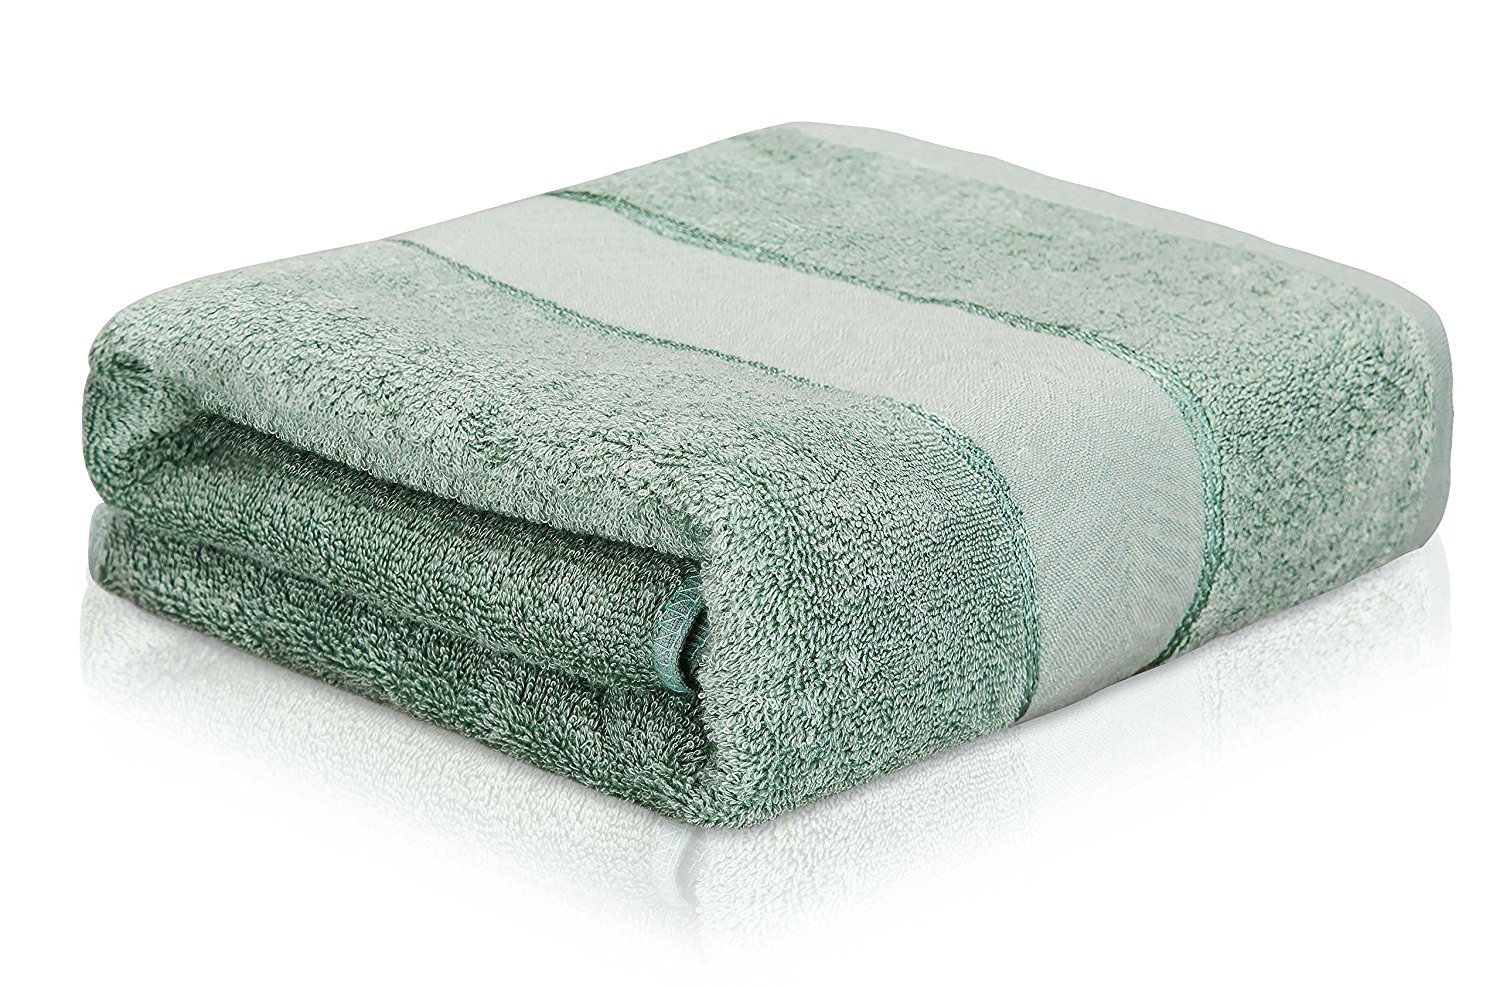 Towels Natural 50% OFF hypoallergenic organic TEAL Bamboo 120x90cm x 2 